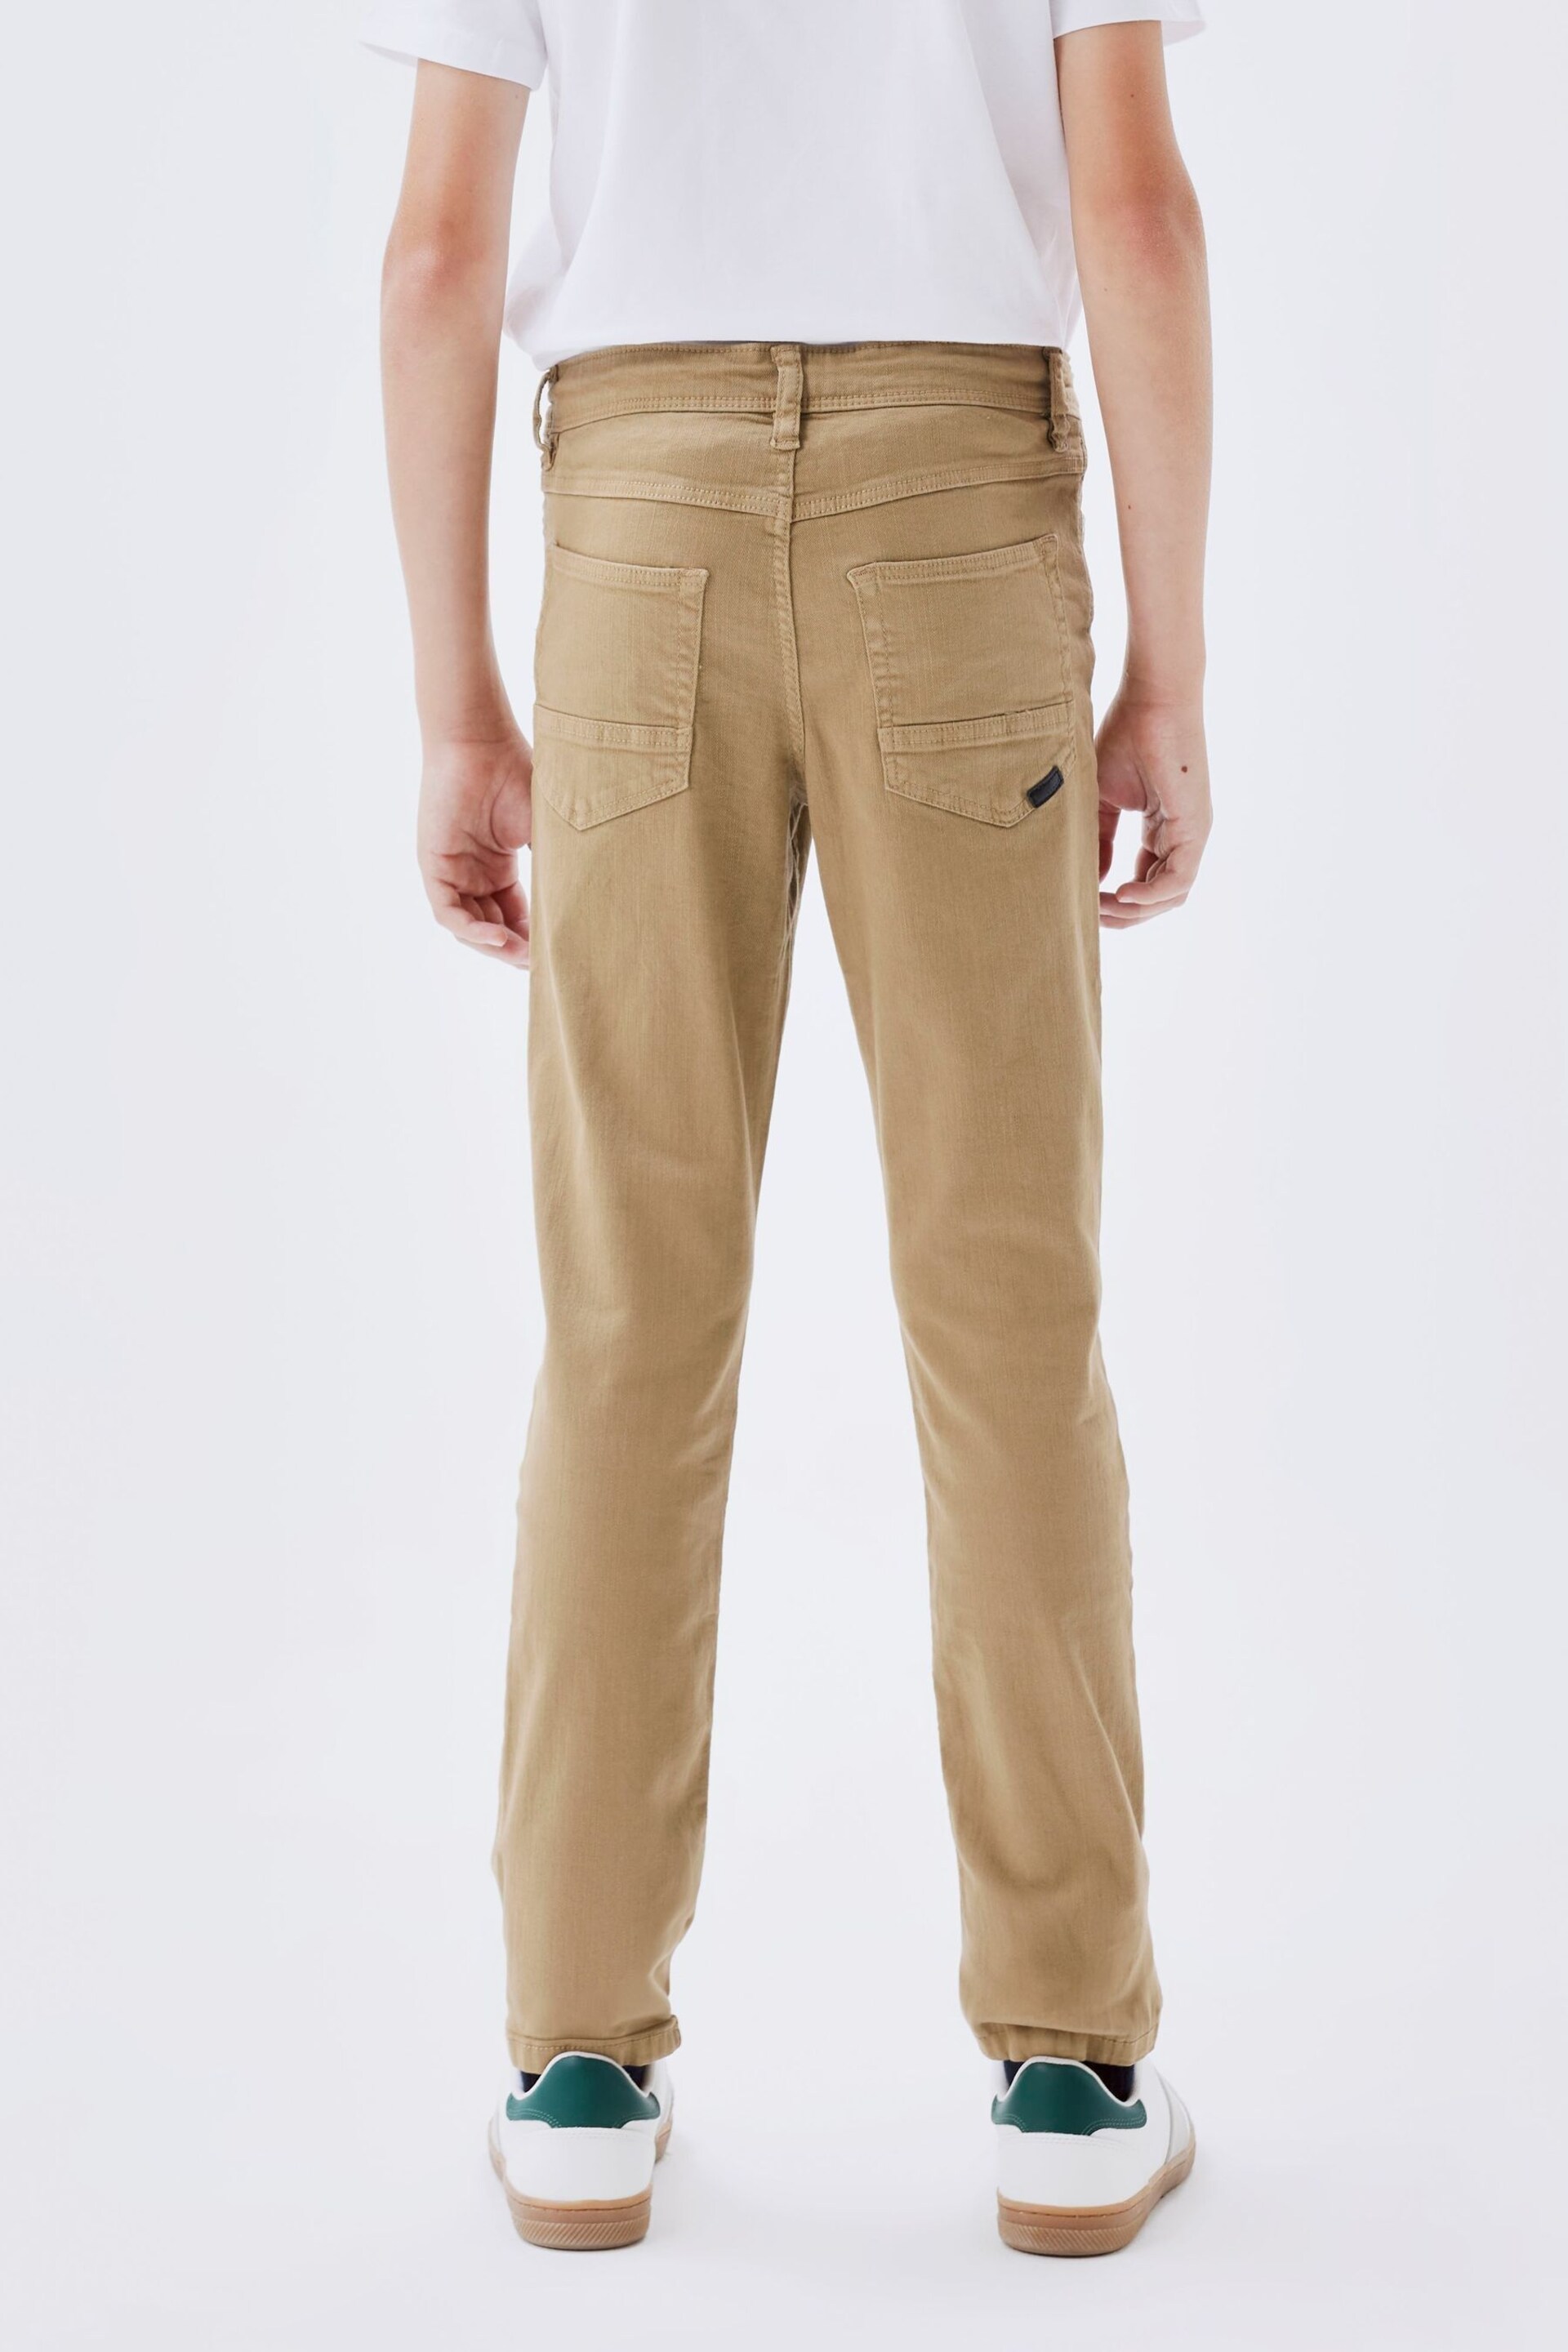 Name It Brown Slim Fit Cotton Twill Chino Trousers With Adjustable Waist - Image 2 of 5